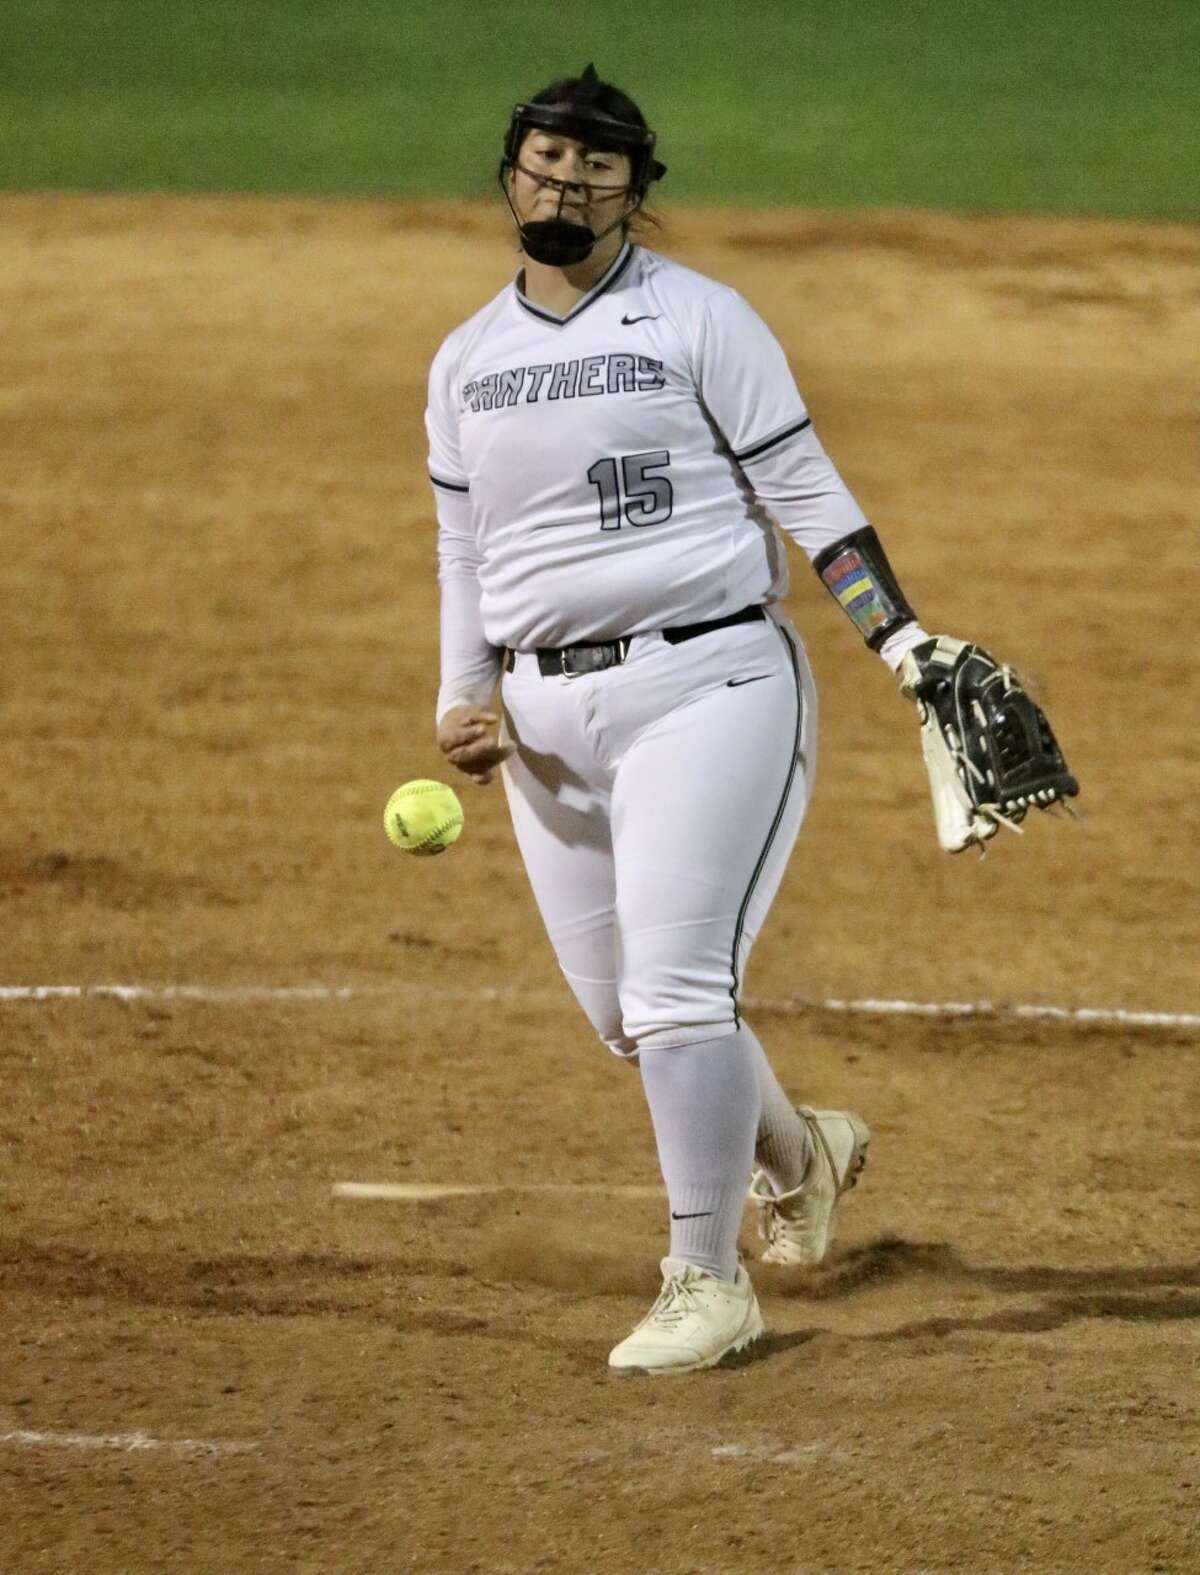 United South's Serena Sanchez held United to three runs off seven hits and two walks with five strikeouts Tuesday, March 28 in a 4-3 victory at the SAC.